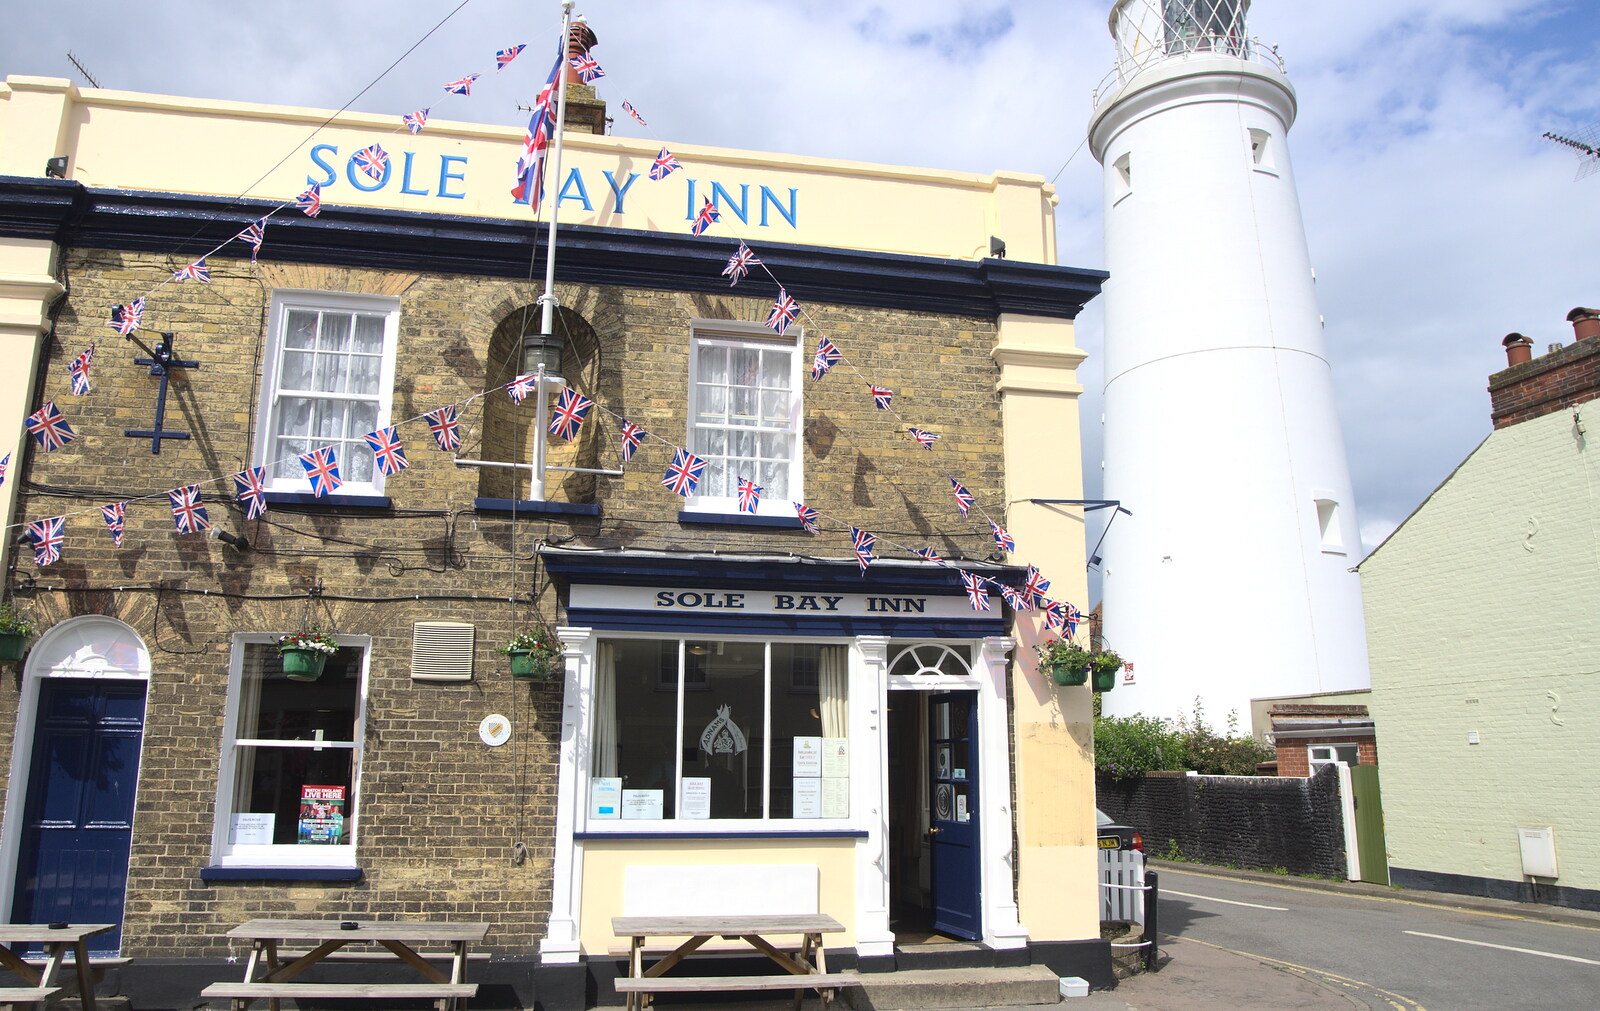 The Sole Bay Inn and lighthouse from A Night at the Crown Hotel, Southwold, Suffolk - 13th June 2012